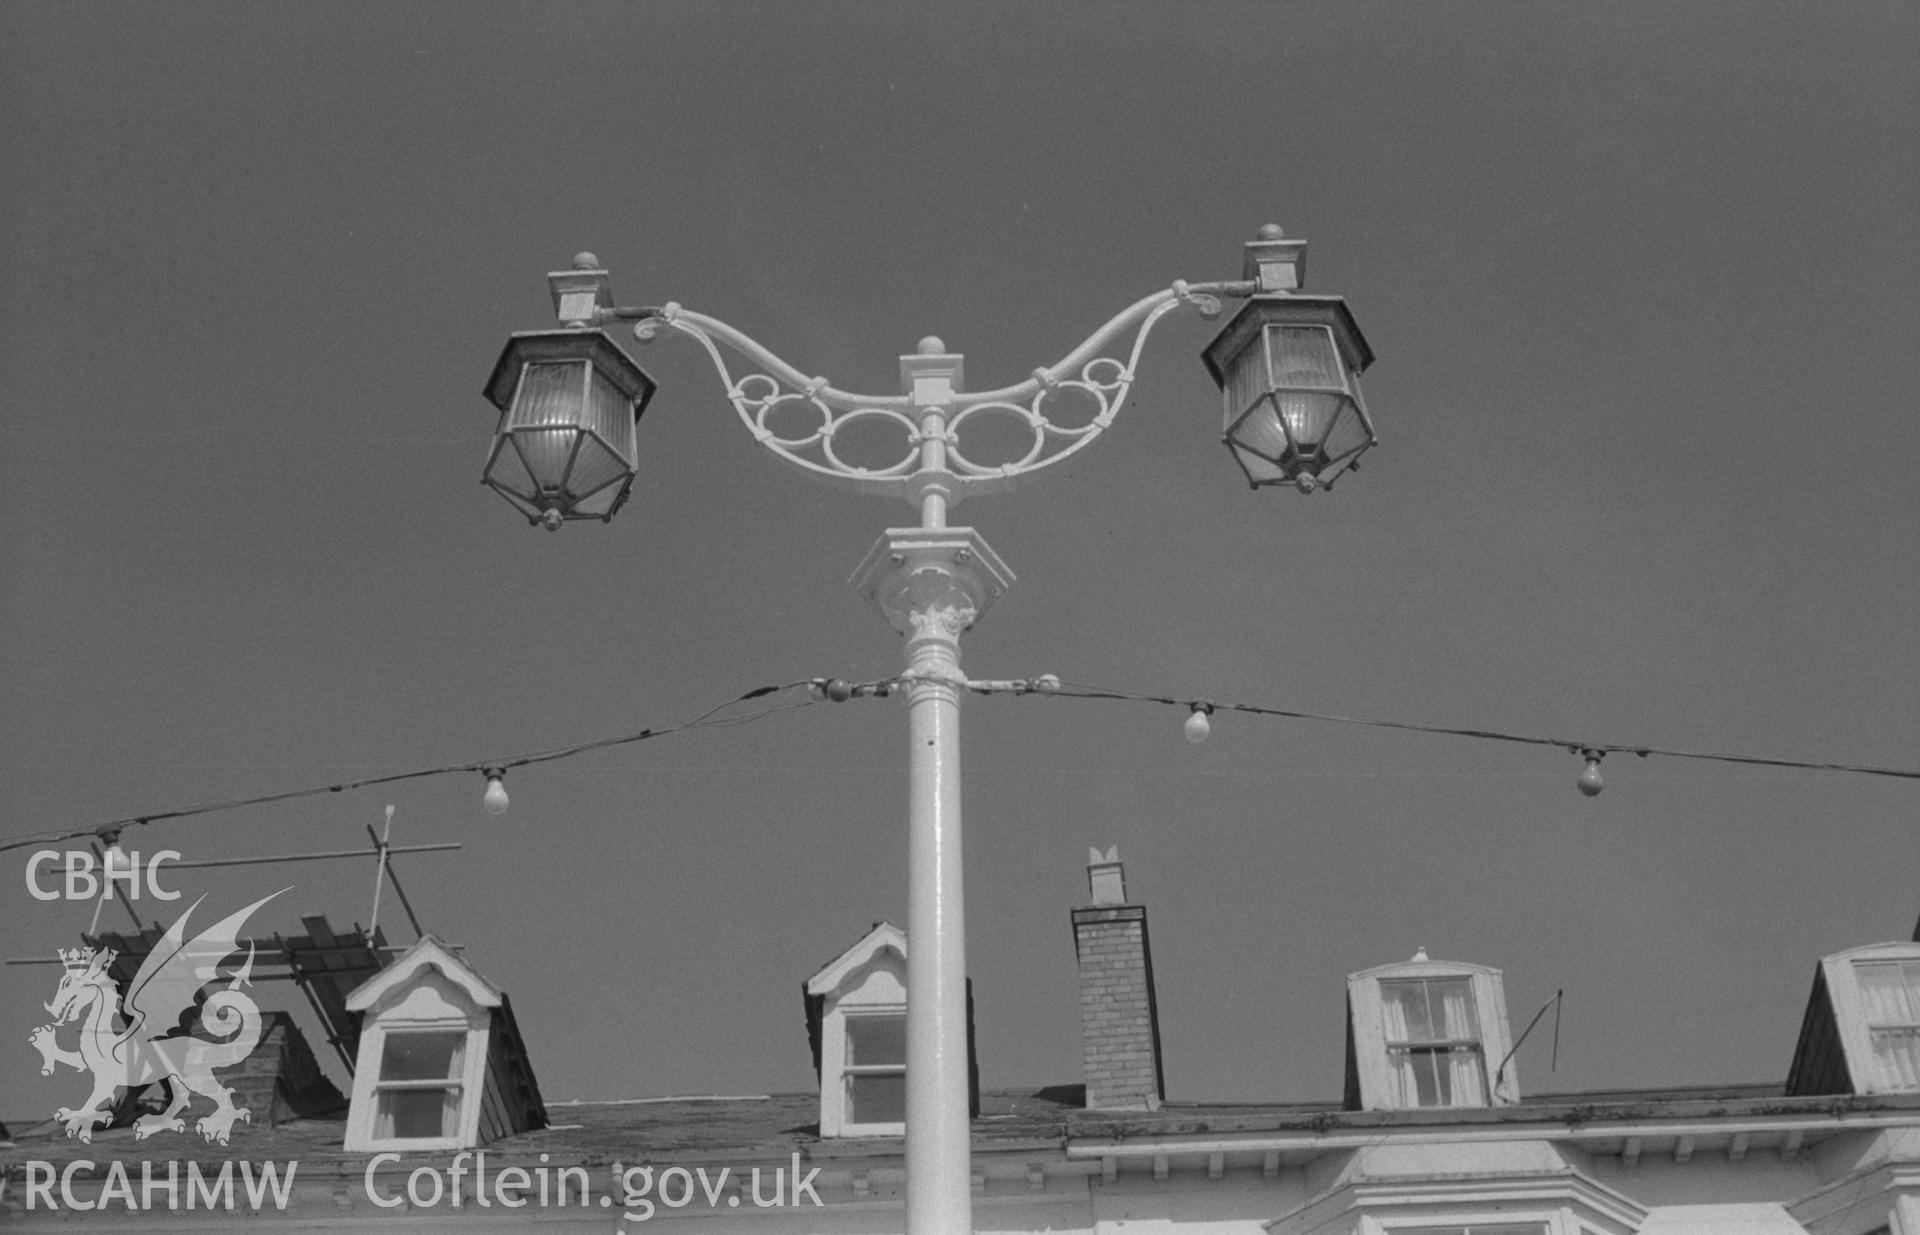 Digital copy of a black and white negative showing lamp post on Aberystwyth promenade near public shelter (opposite Marine hotel). Photographed by Arthur O. Chater in August 1967 looking east from Grid Reference SN 583 821.